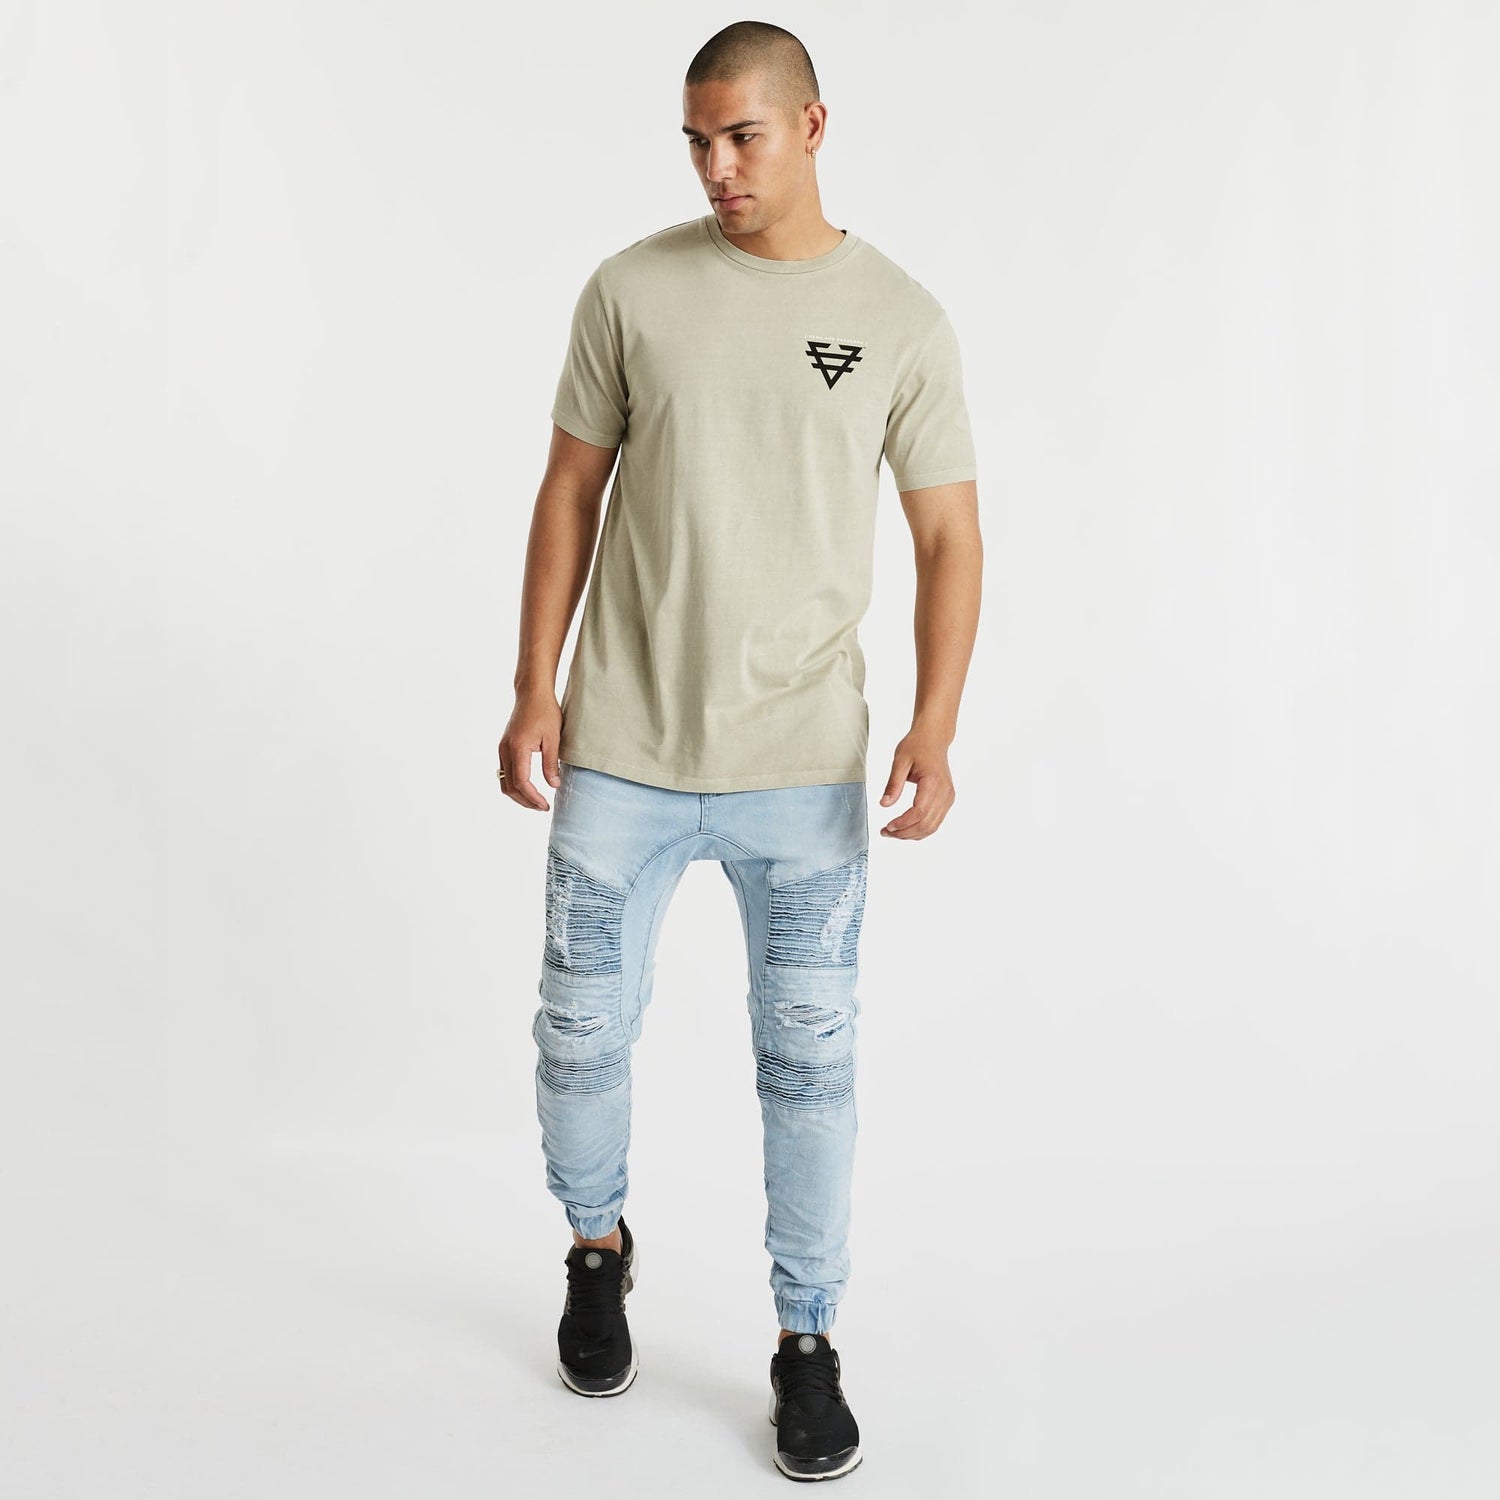 Undivided Cape Back T-Shirt Pigment Feather Grey